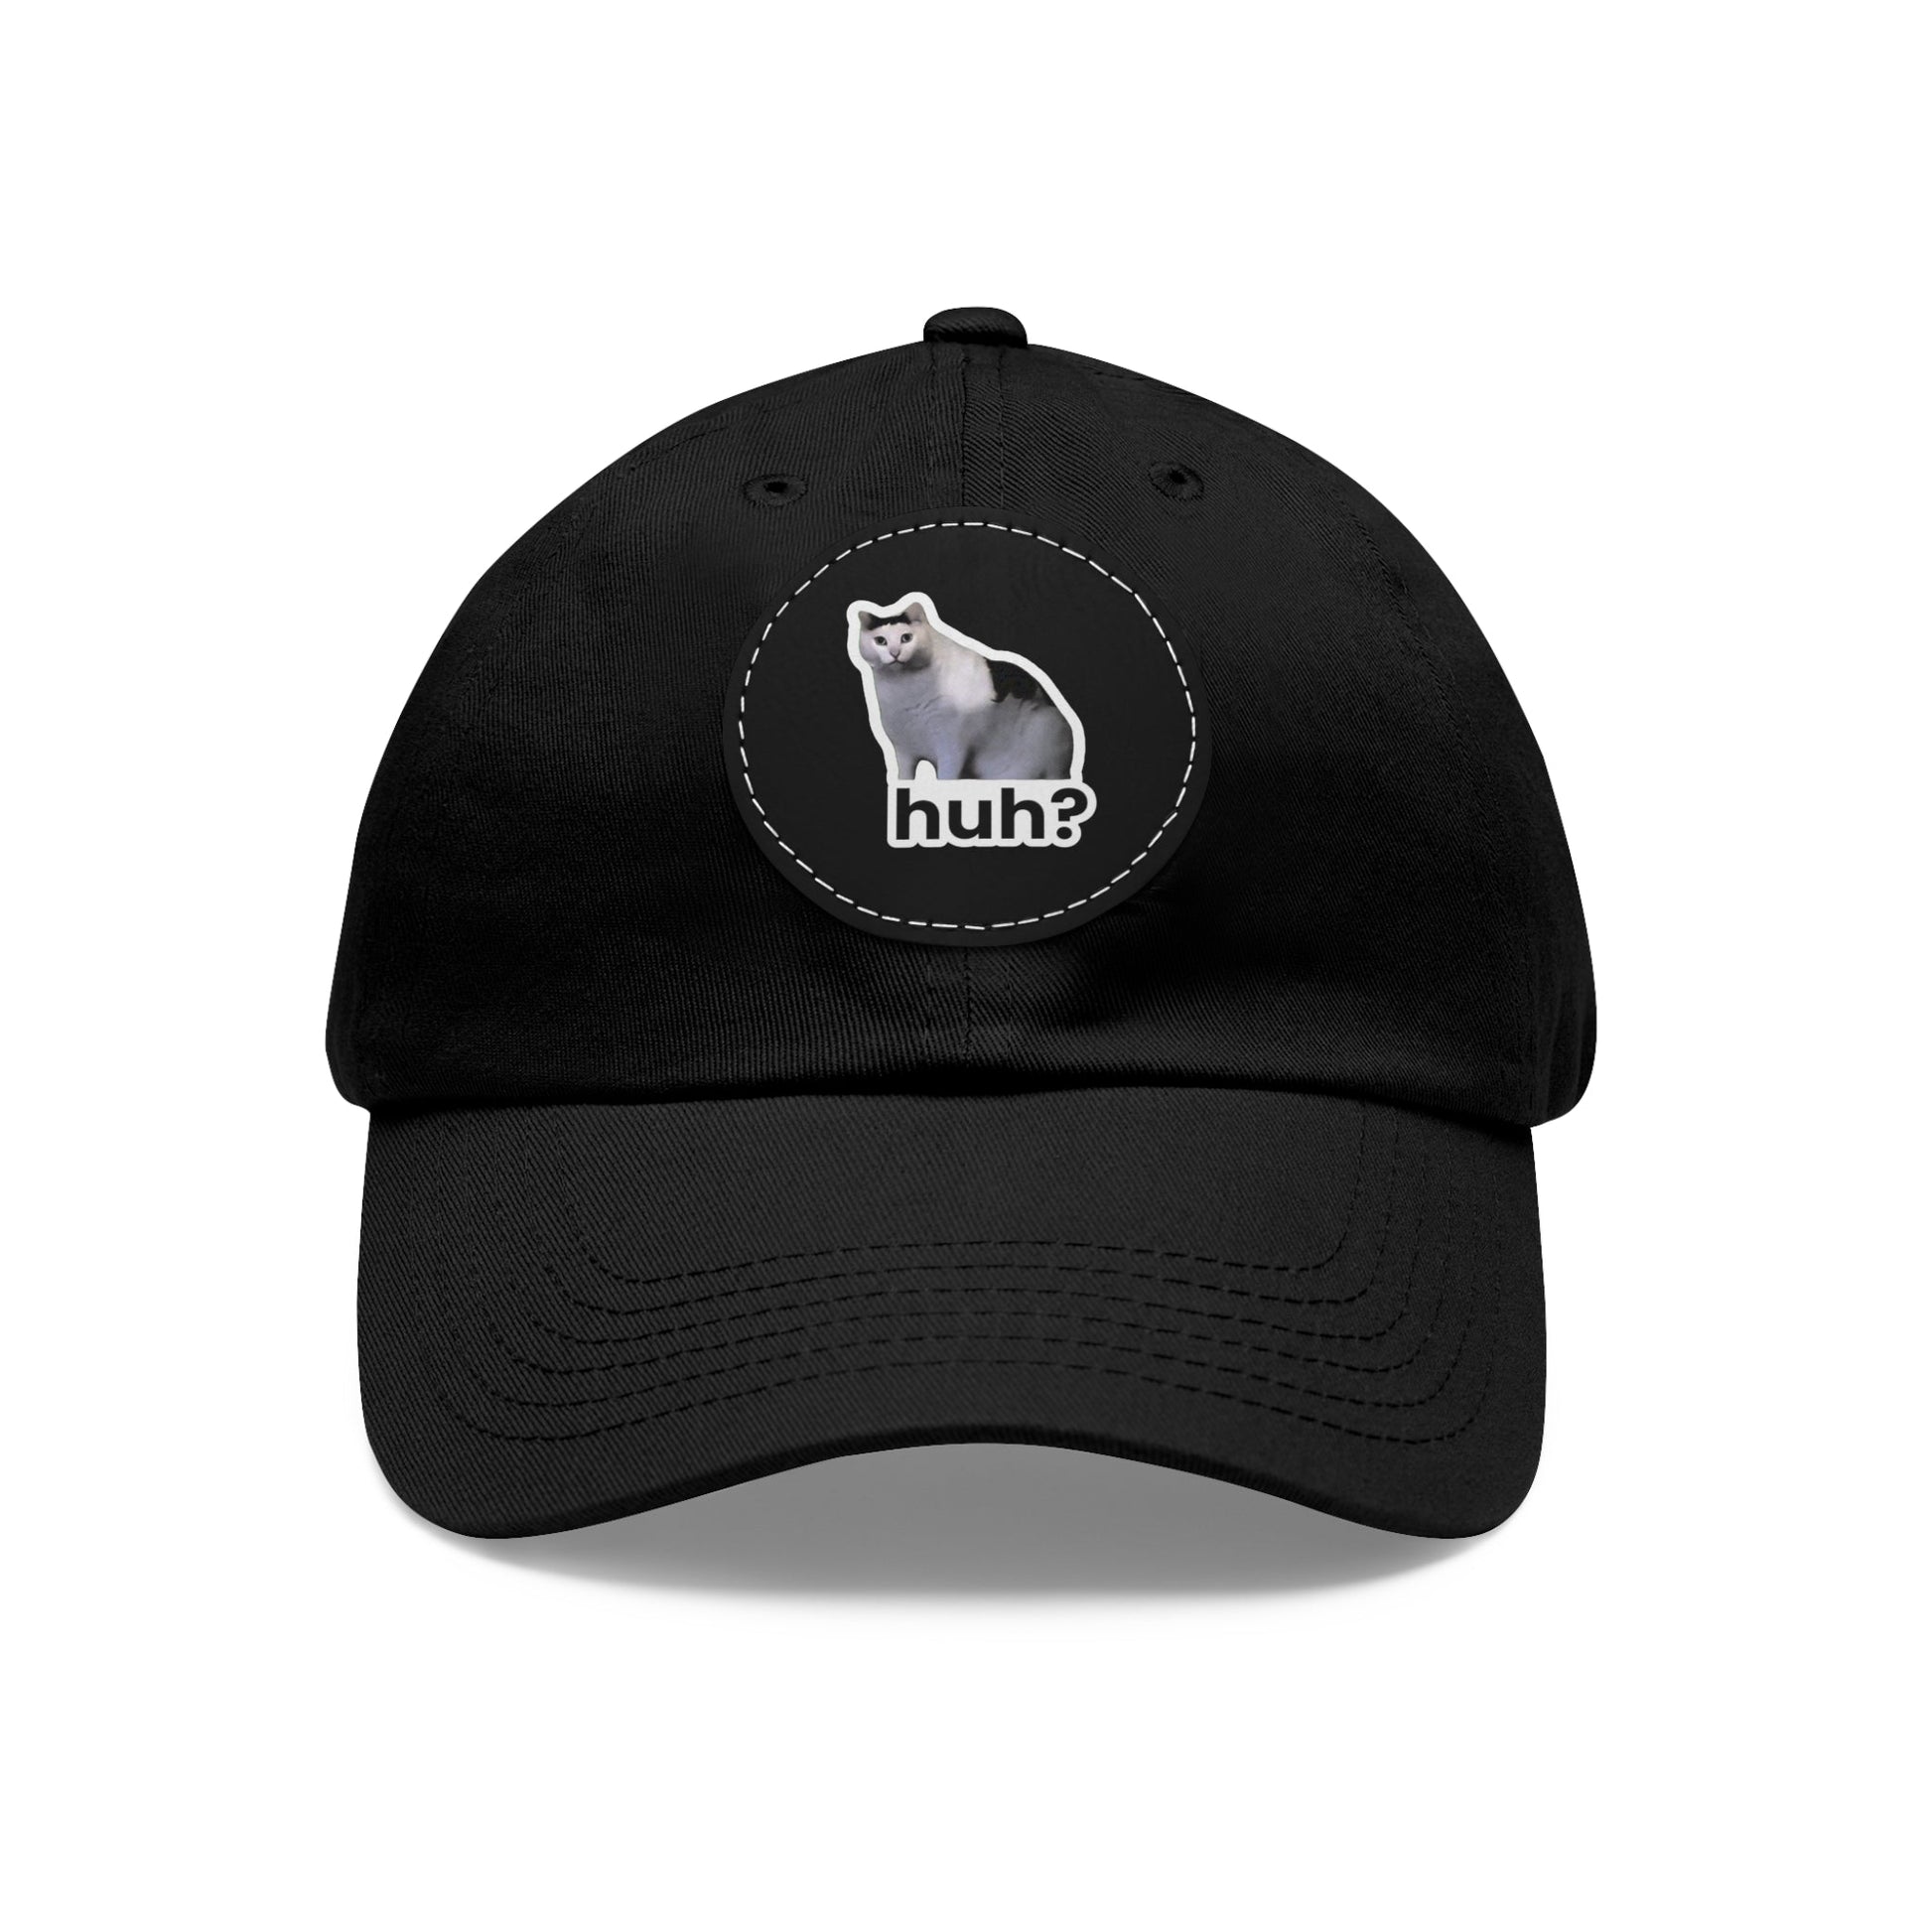 Huh Cat Meme Dad Hat with Leather Patch (Round) - getallfun